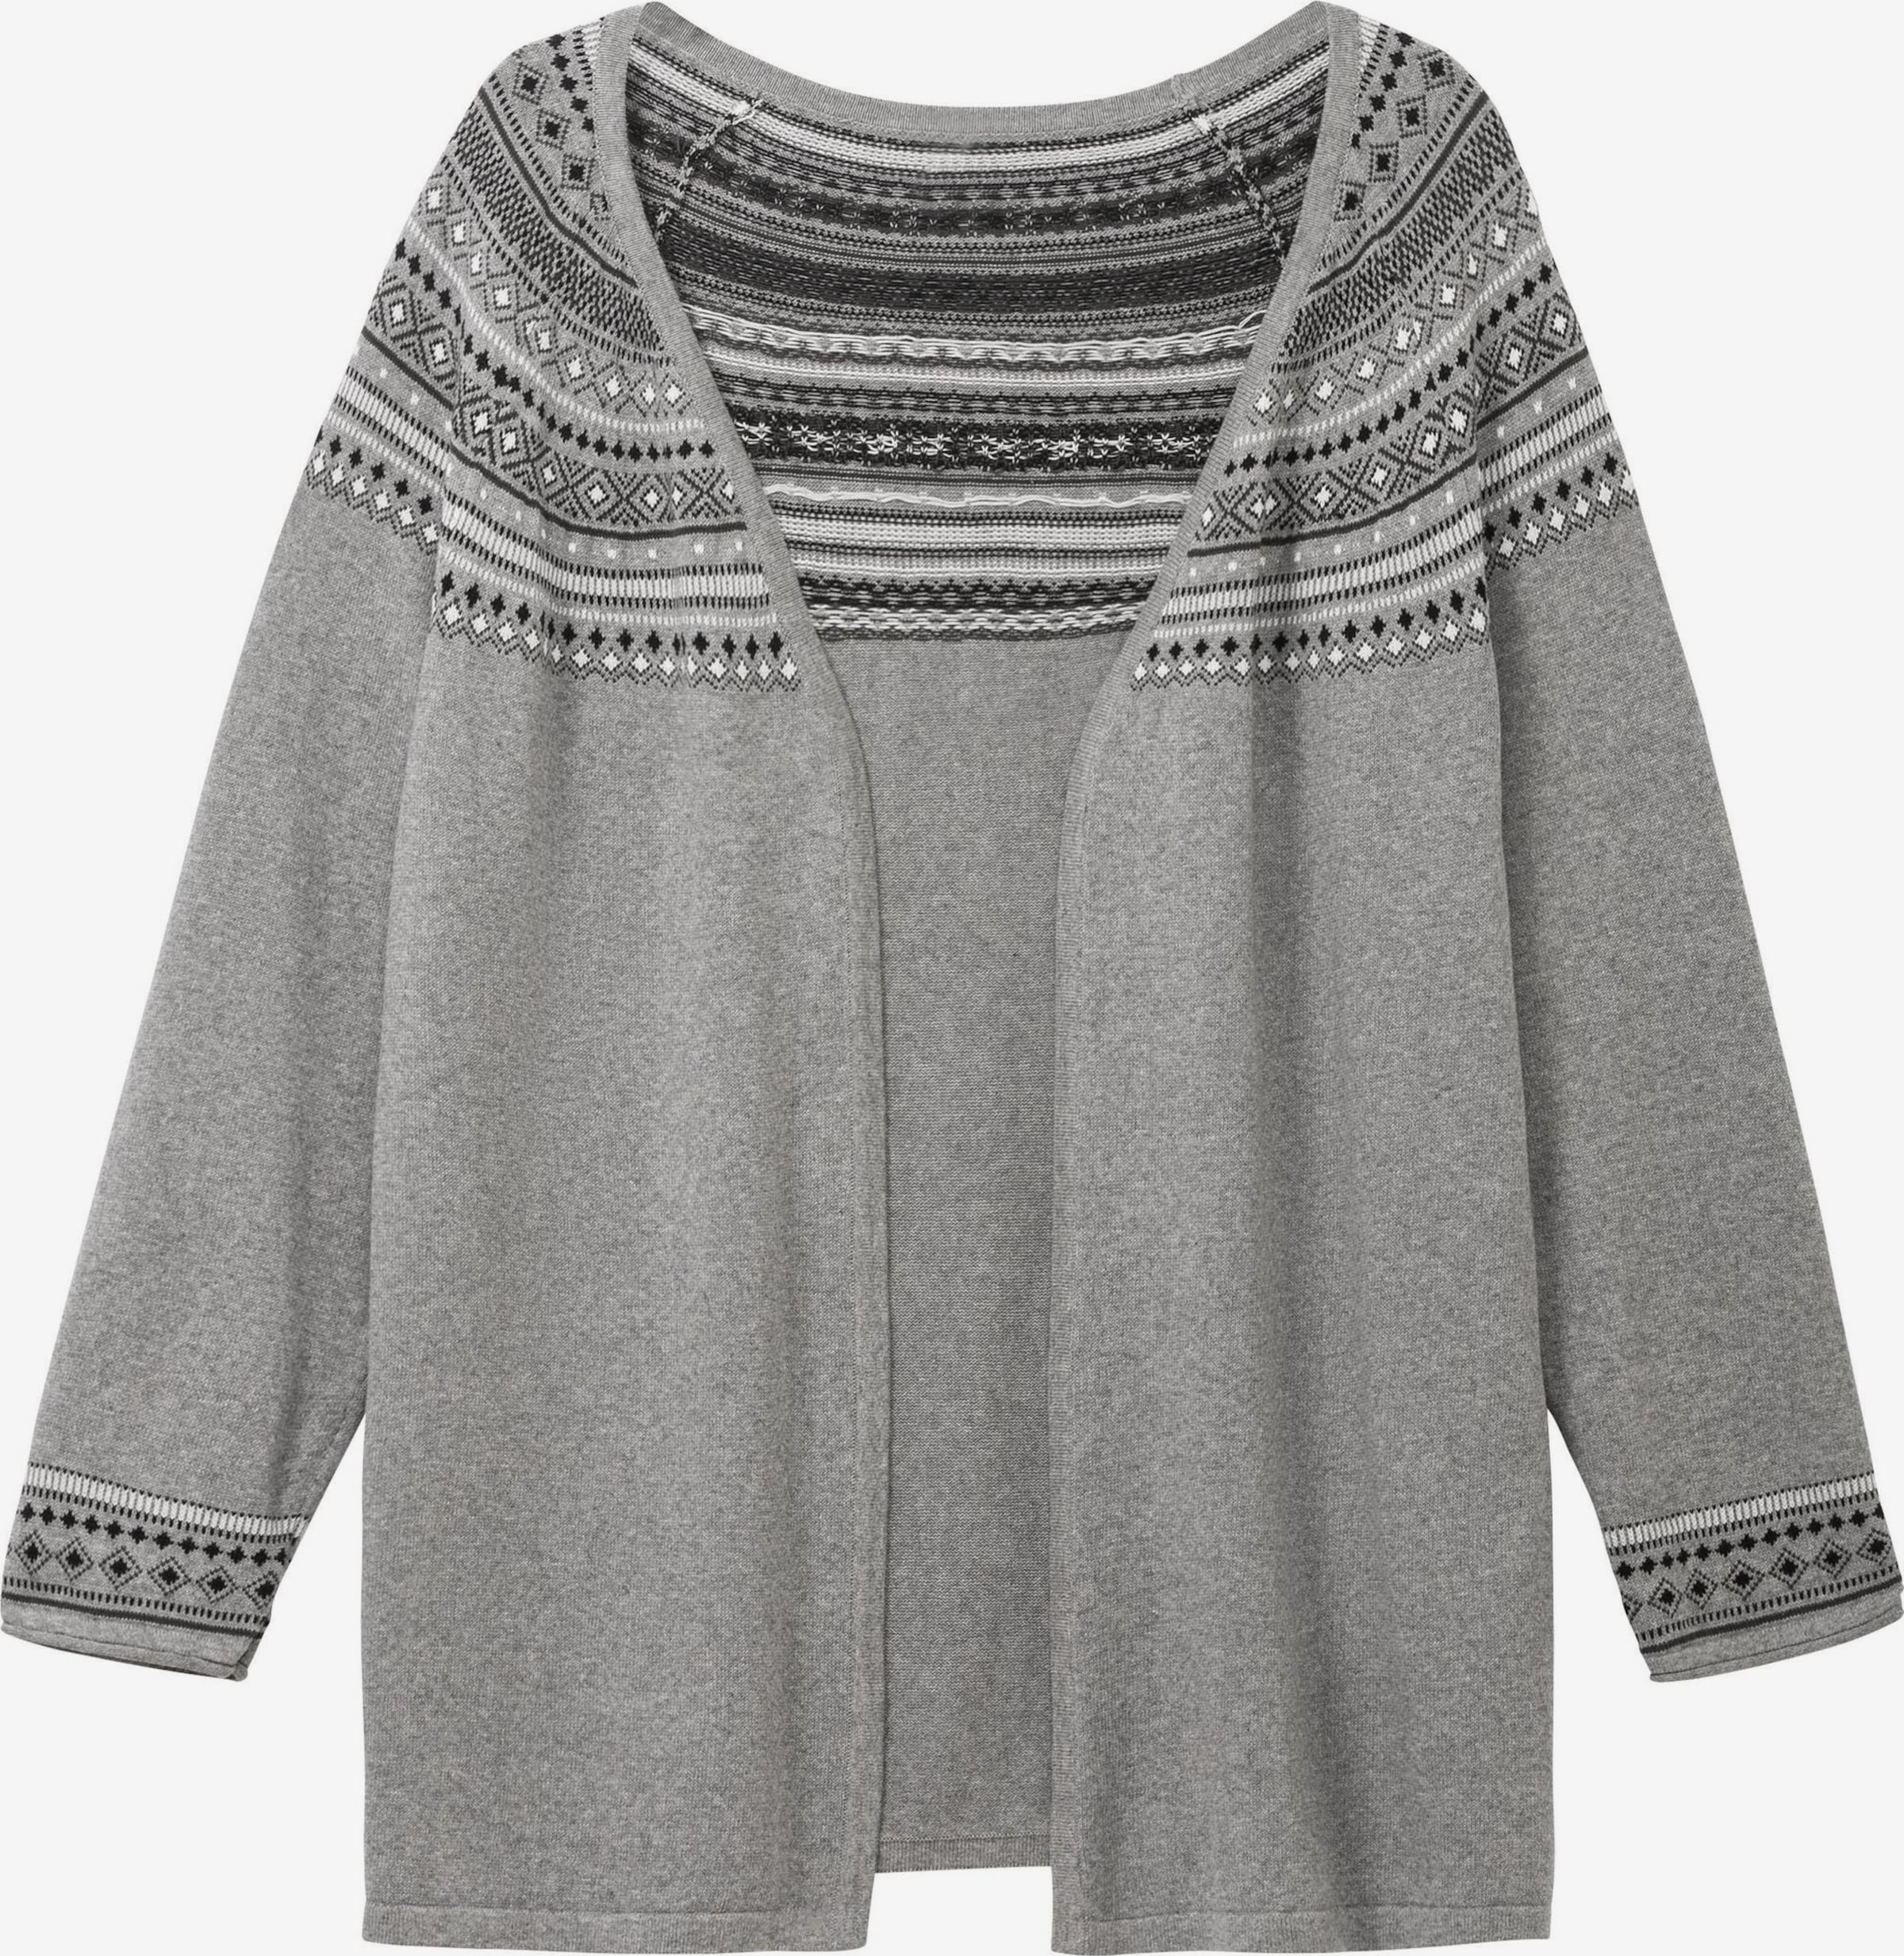 ABOUT Strickjacke YOU SHEEGO in | Graumeliert